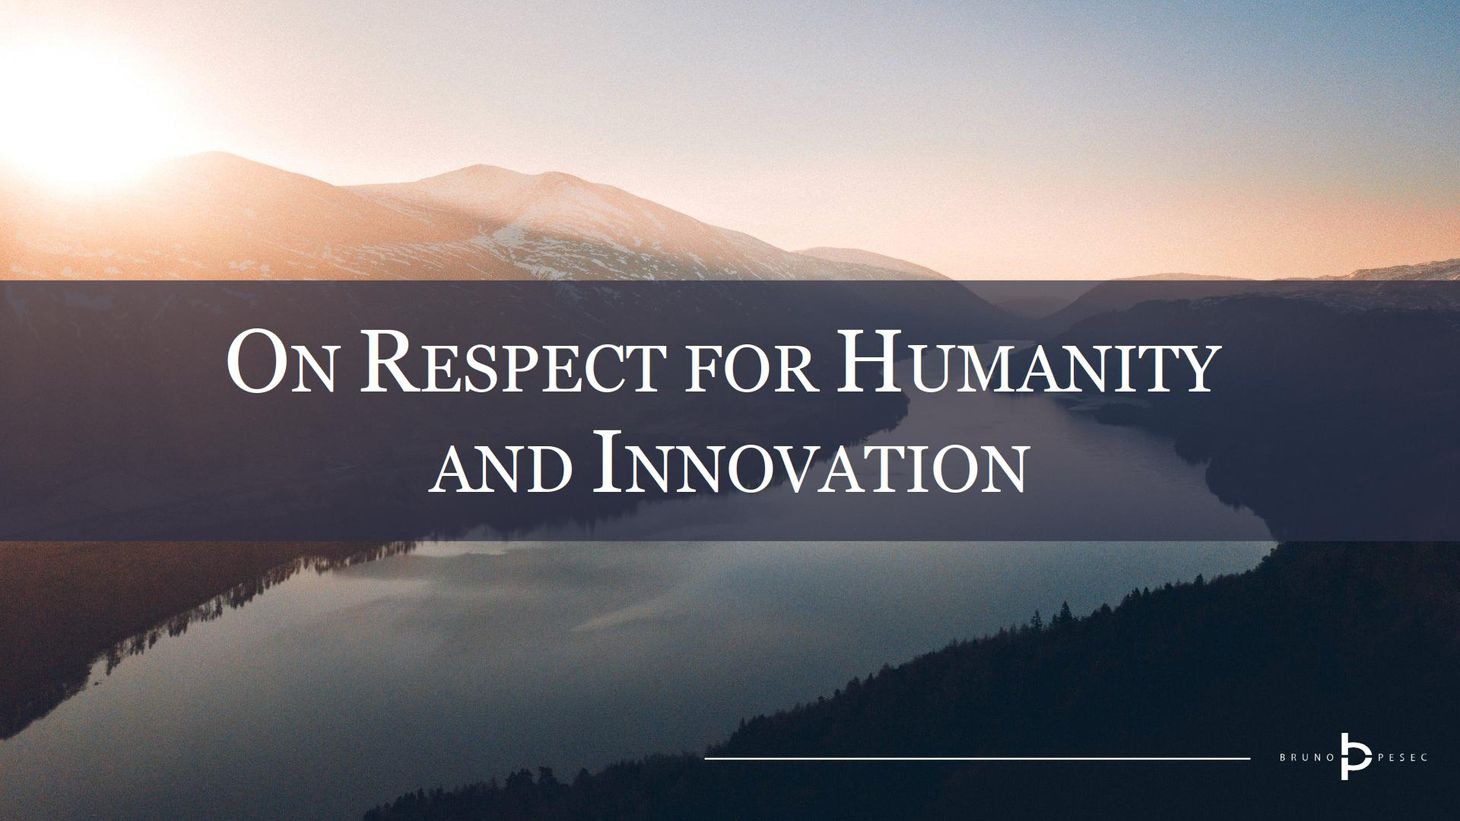 On respect for humanity and innovation